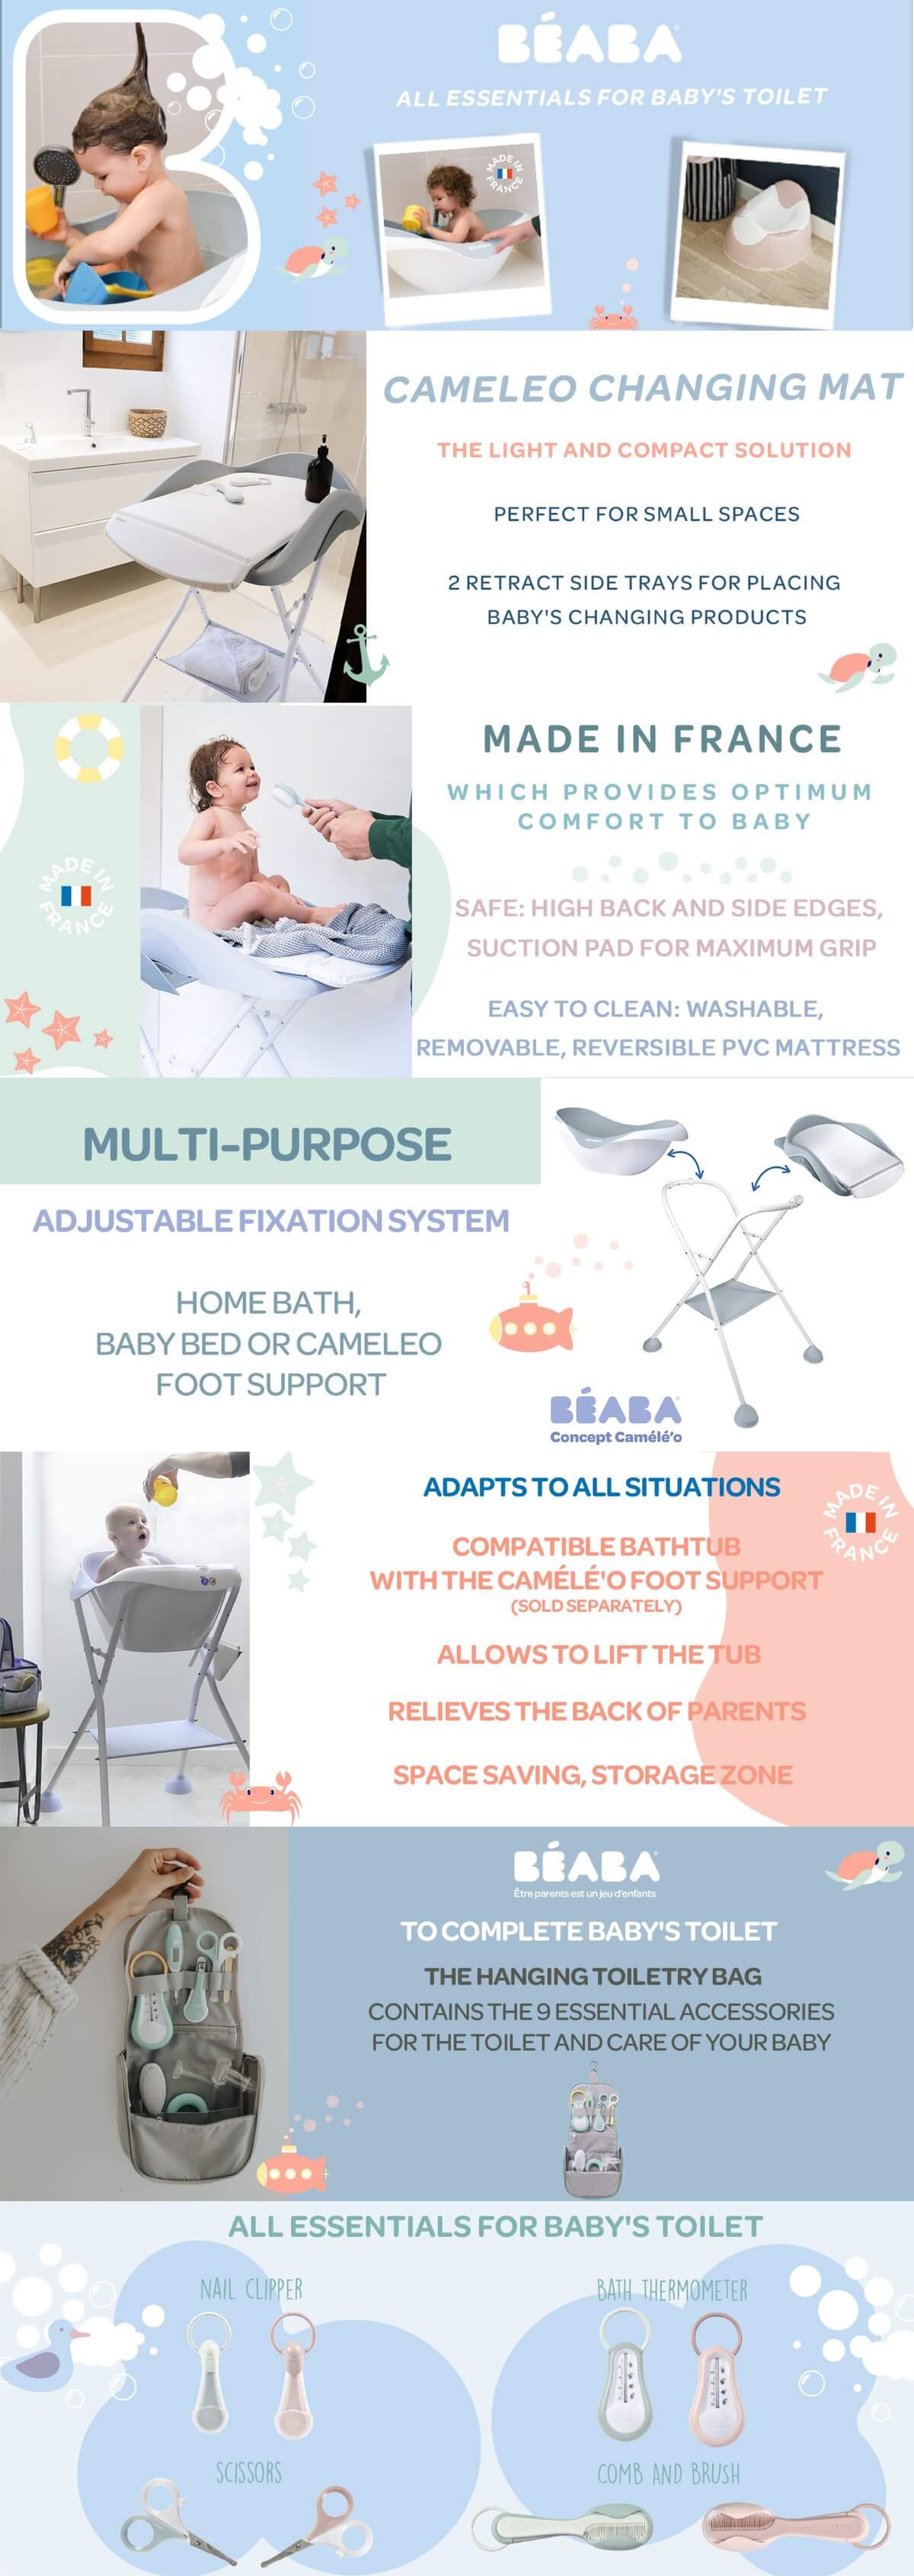 Beaba Cameleo Baby Bath Foot Support (Stand Only) - Light Mist